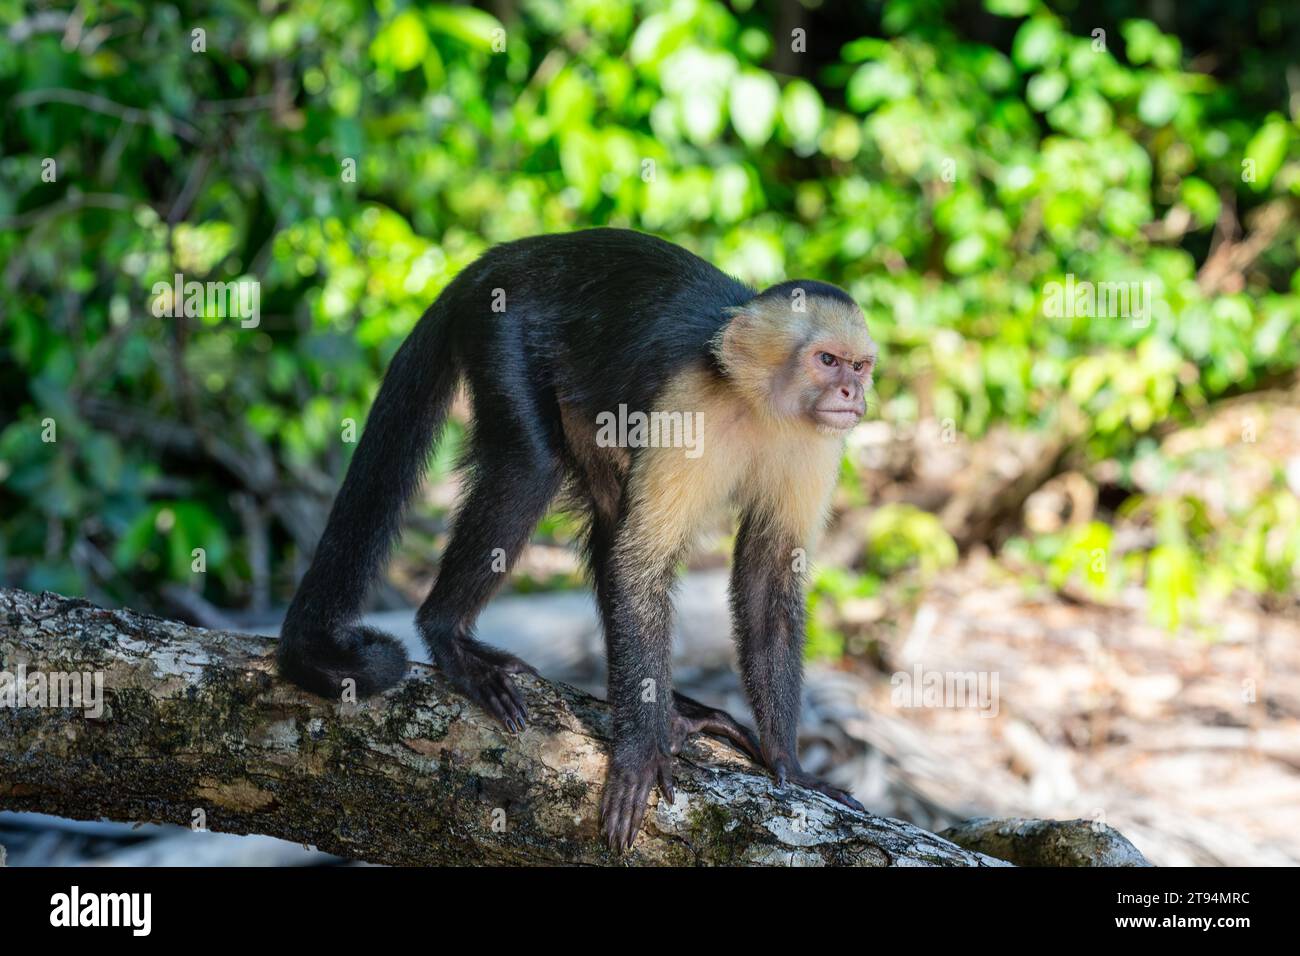 A wild capuchin monkey on a log in Costa Rica.  The monkey’s expression looks like scowling or frowning. Stock Photo